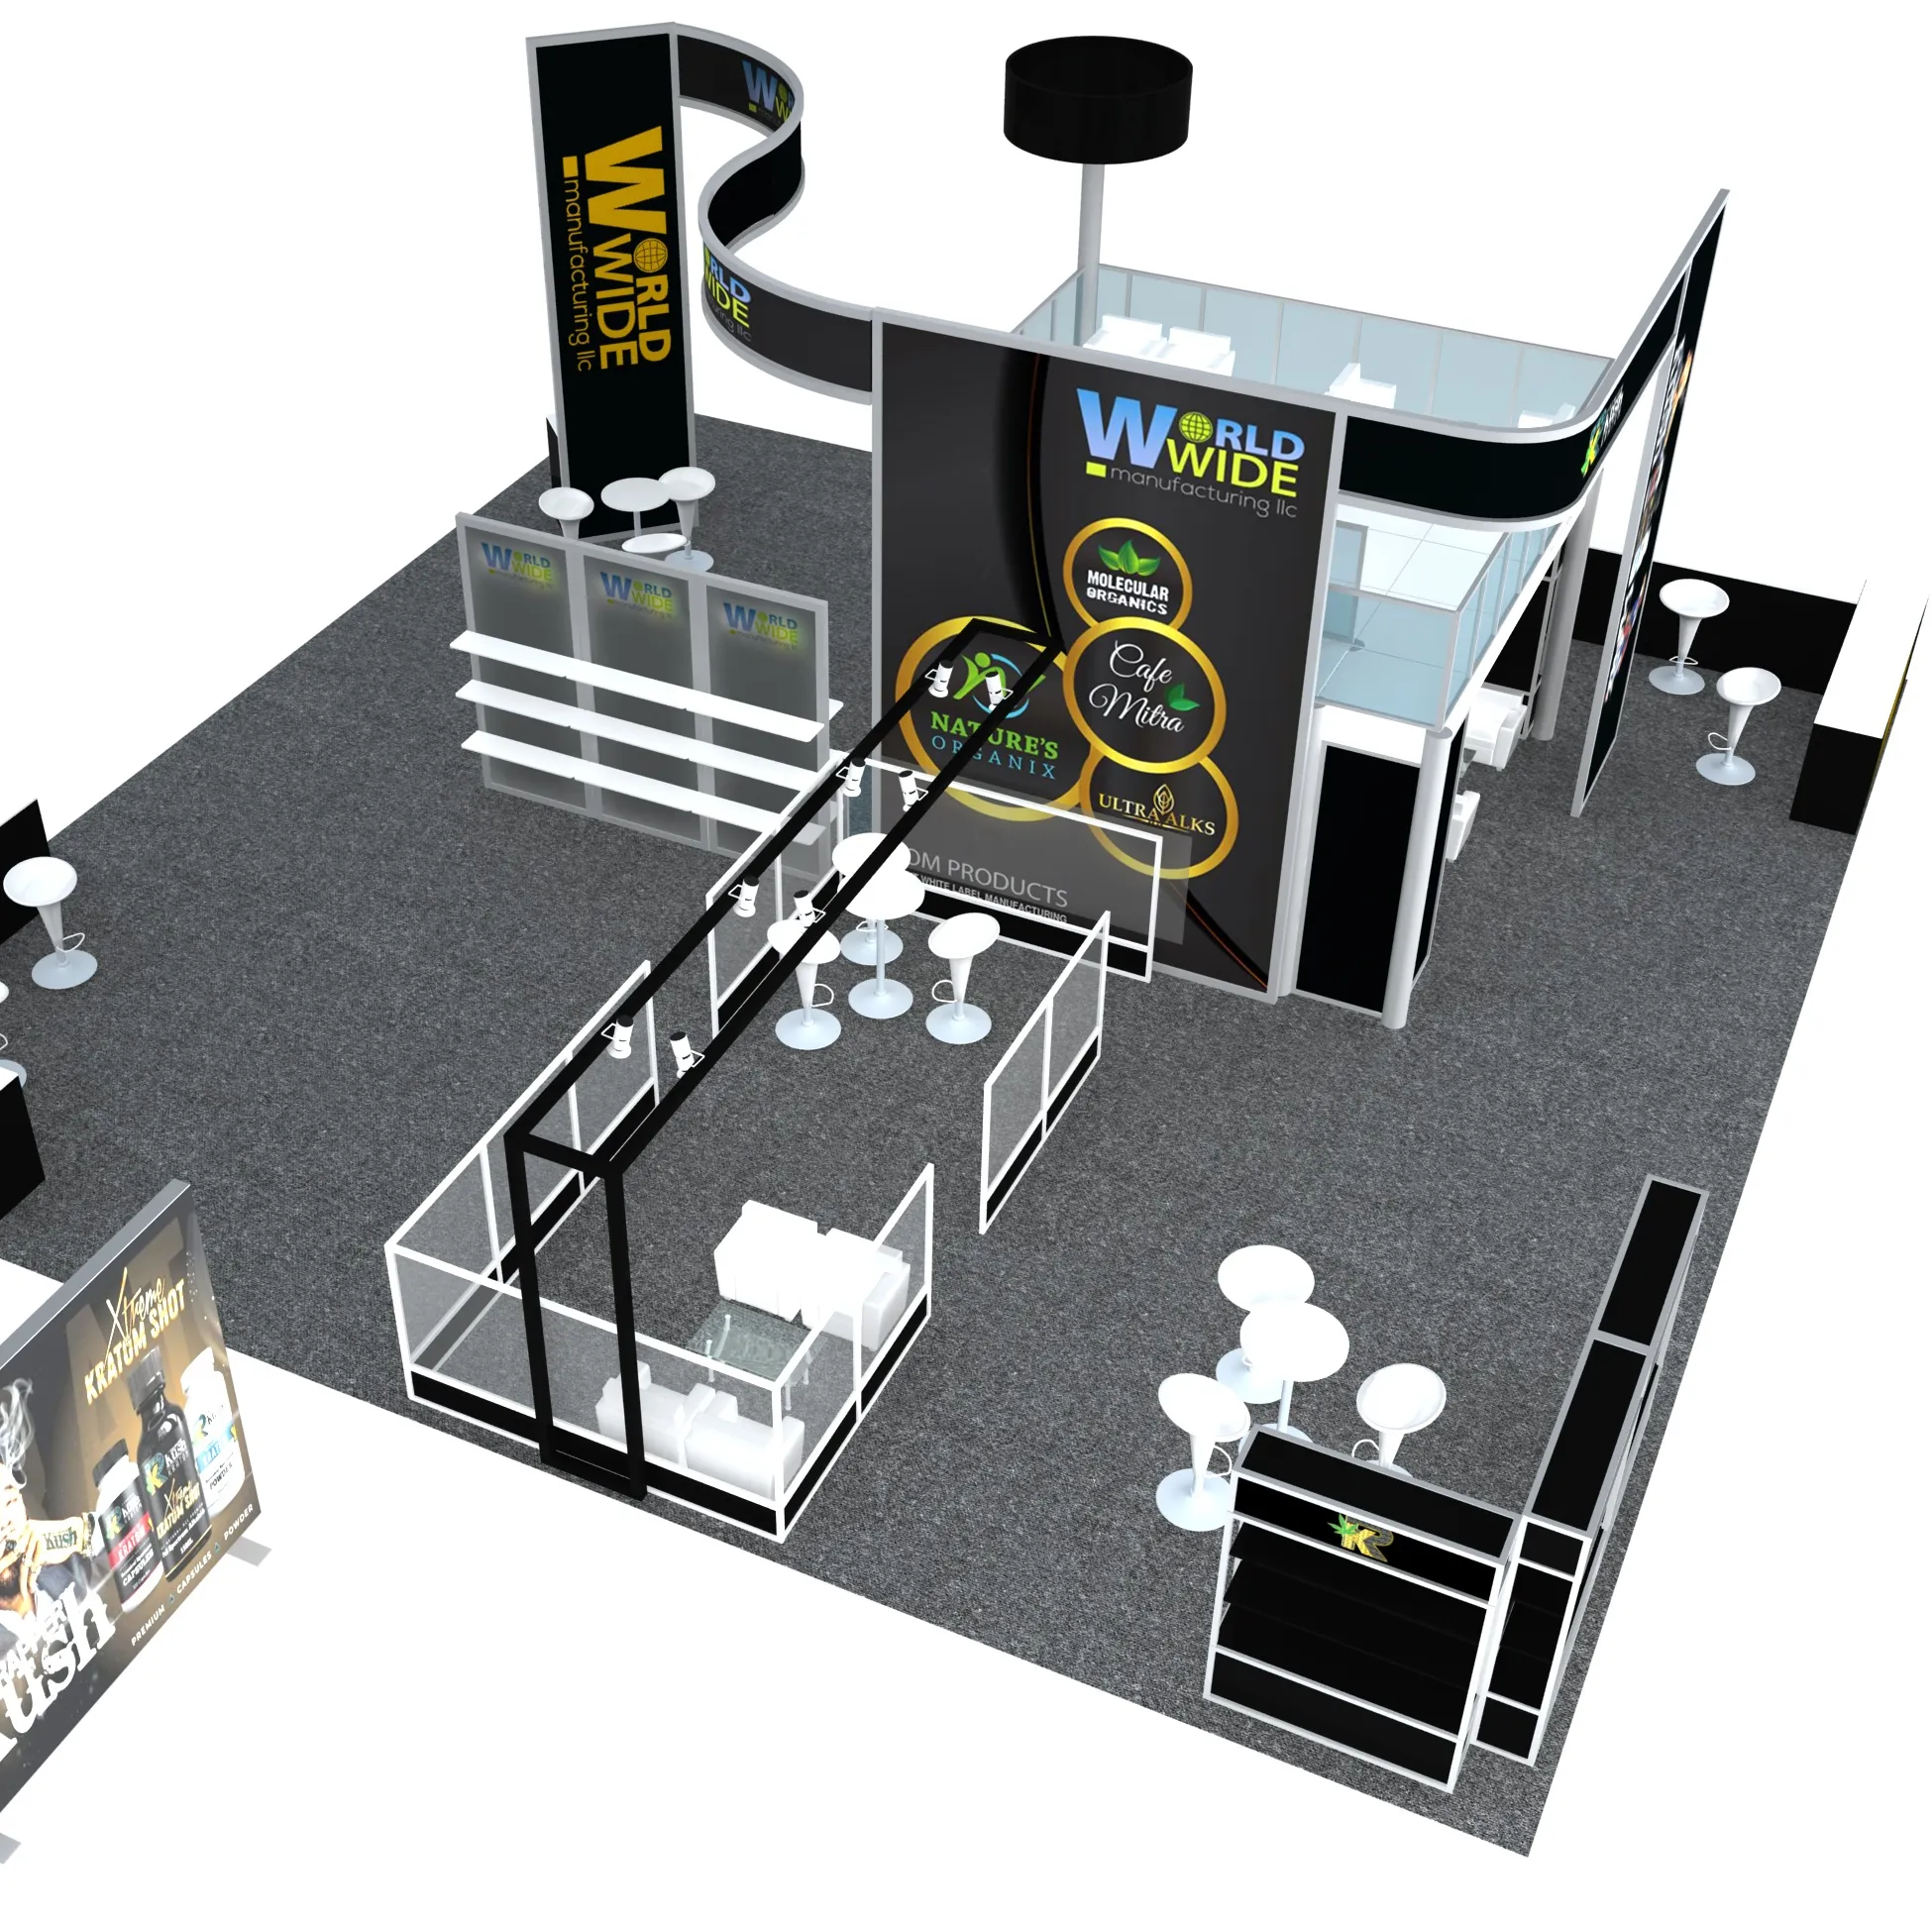 Expo booth!! Heavy duty double deck booth, double deck exhibition booth design and build service